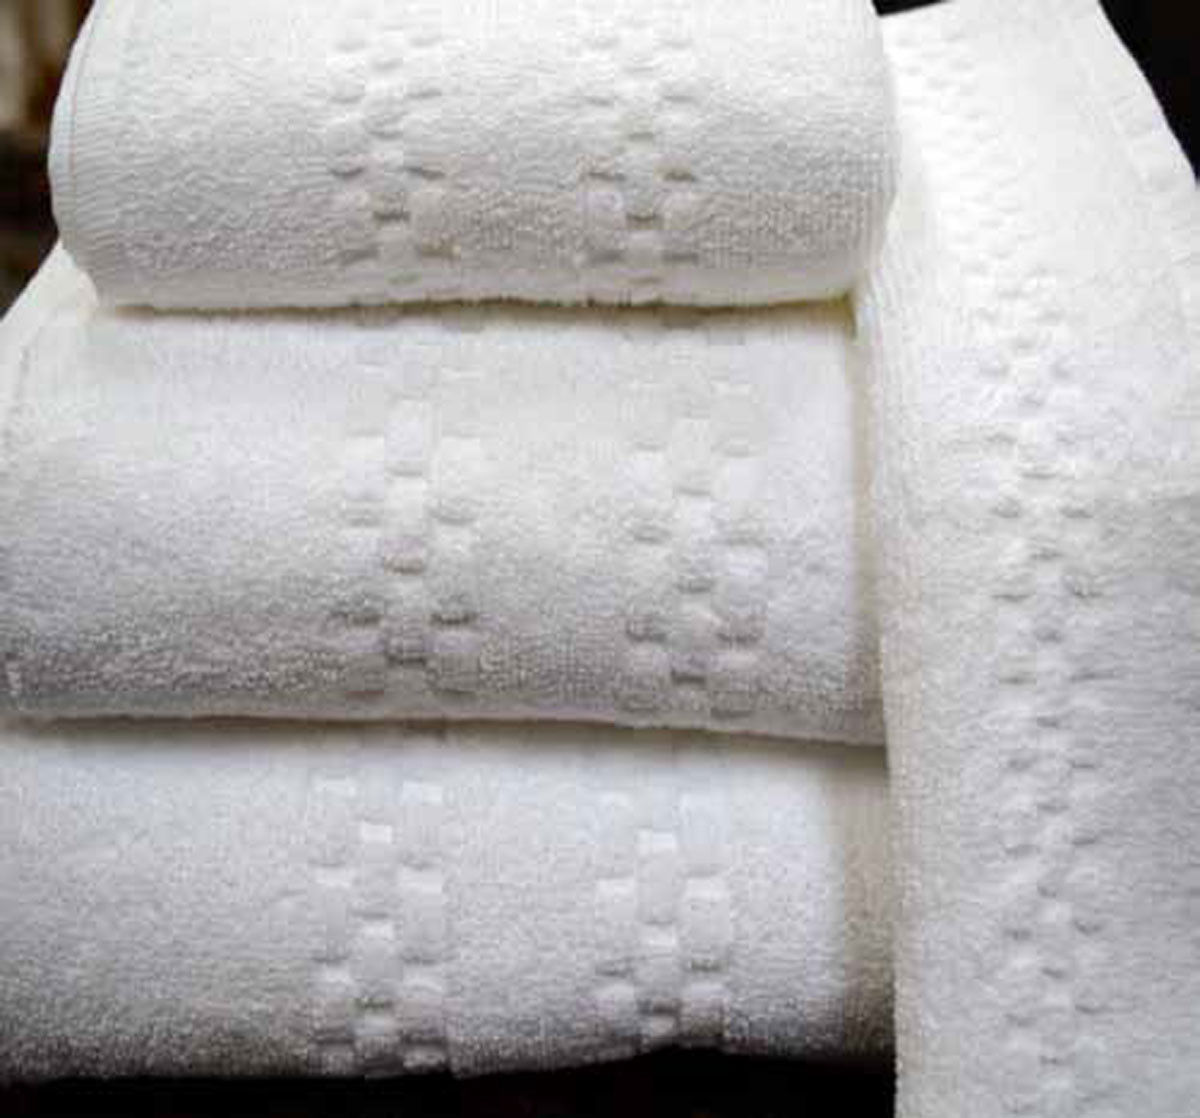 What are different towels used for?